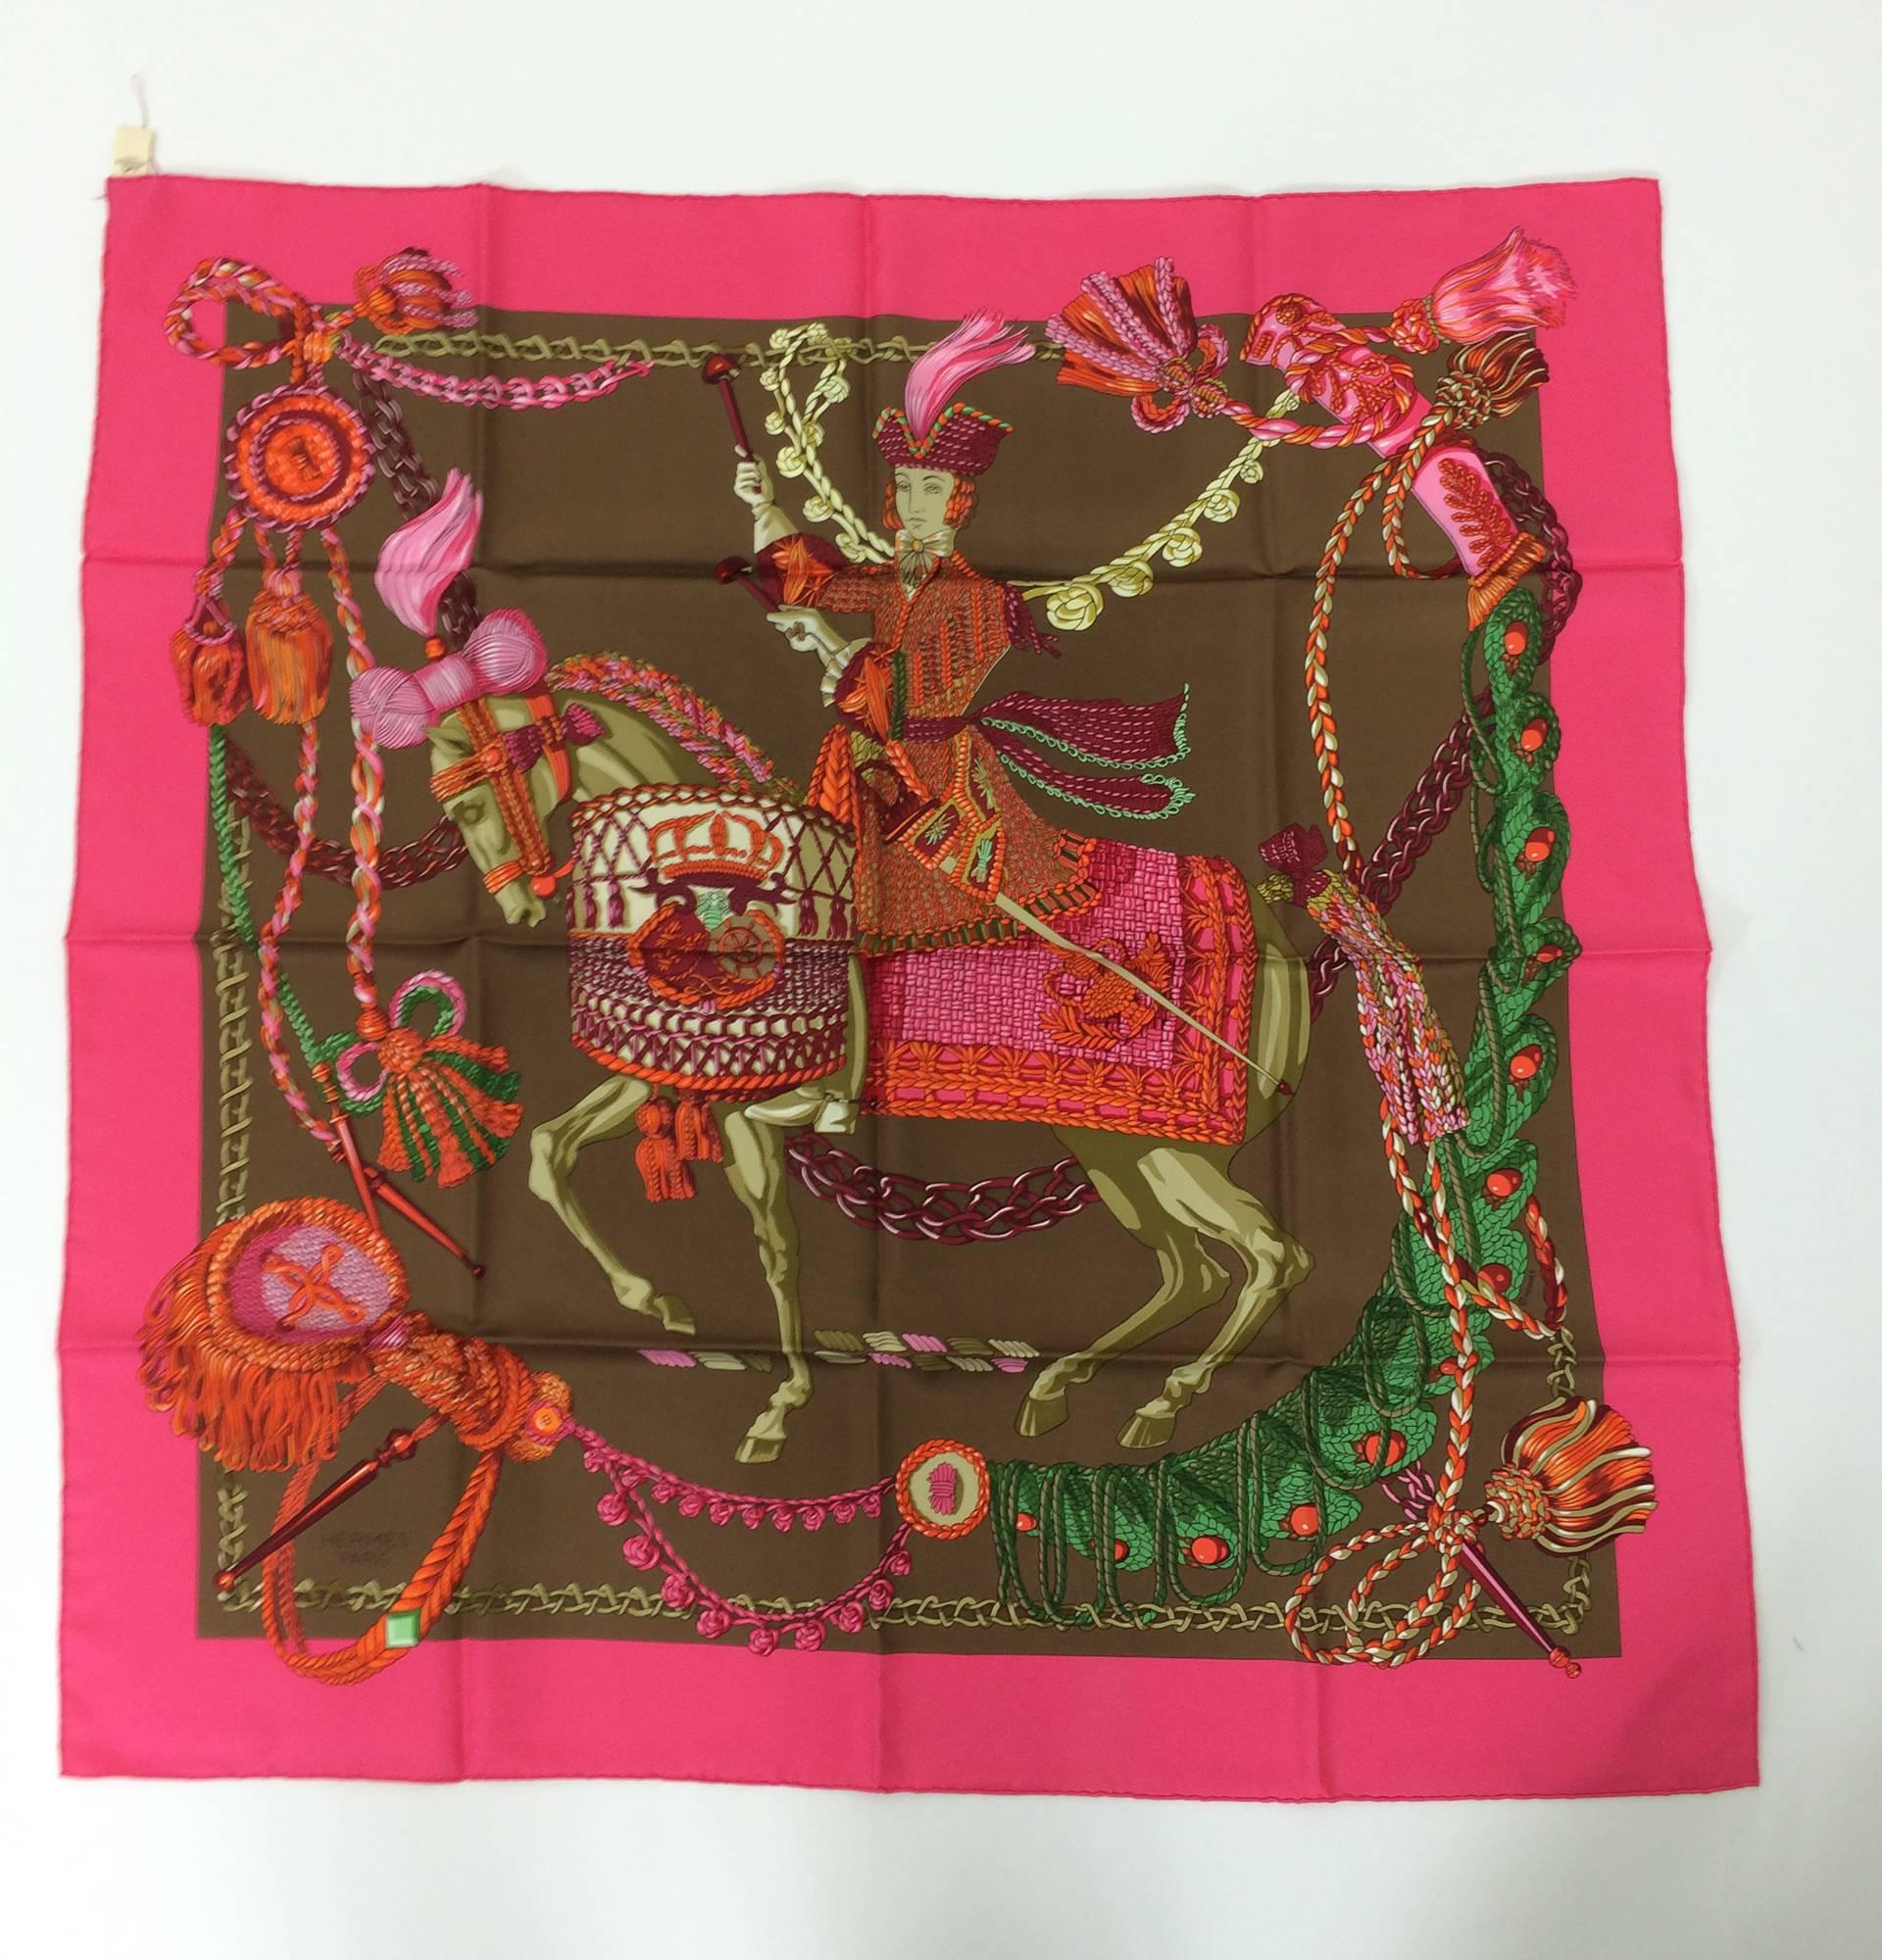 Hermes  Le Timbalier silk twill scarf by Françoise Heron NWT 36